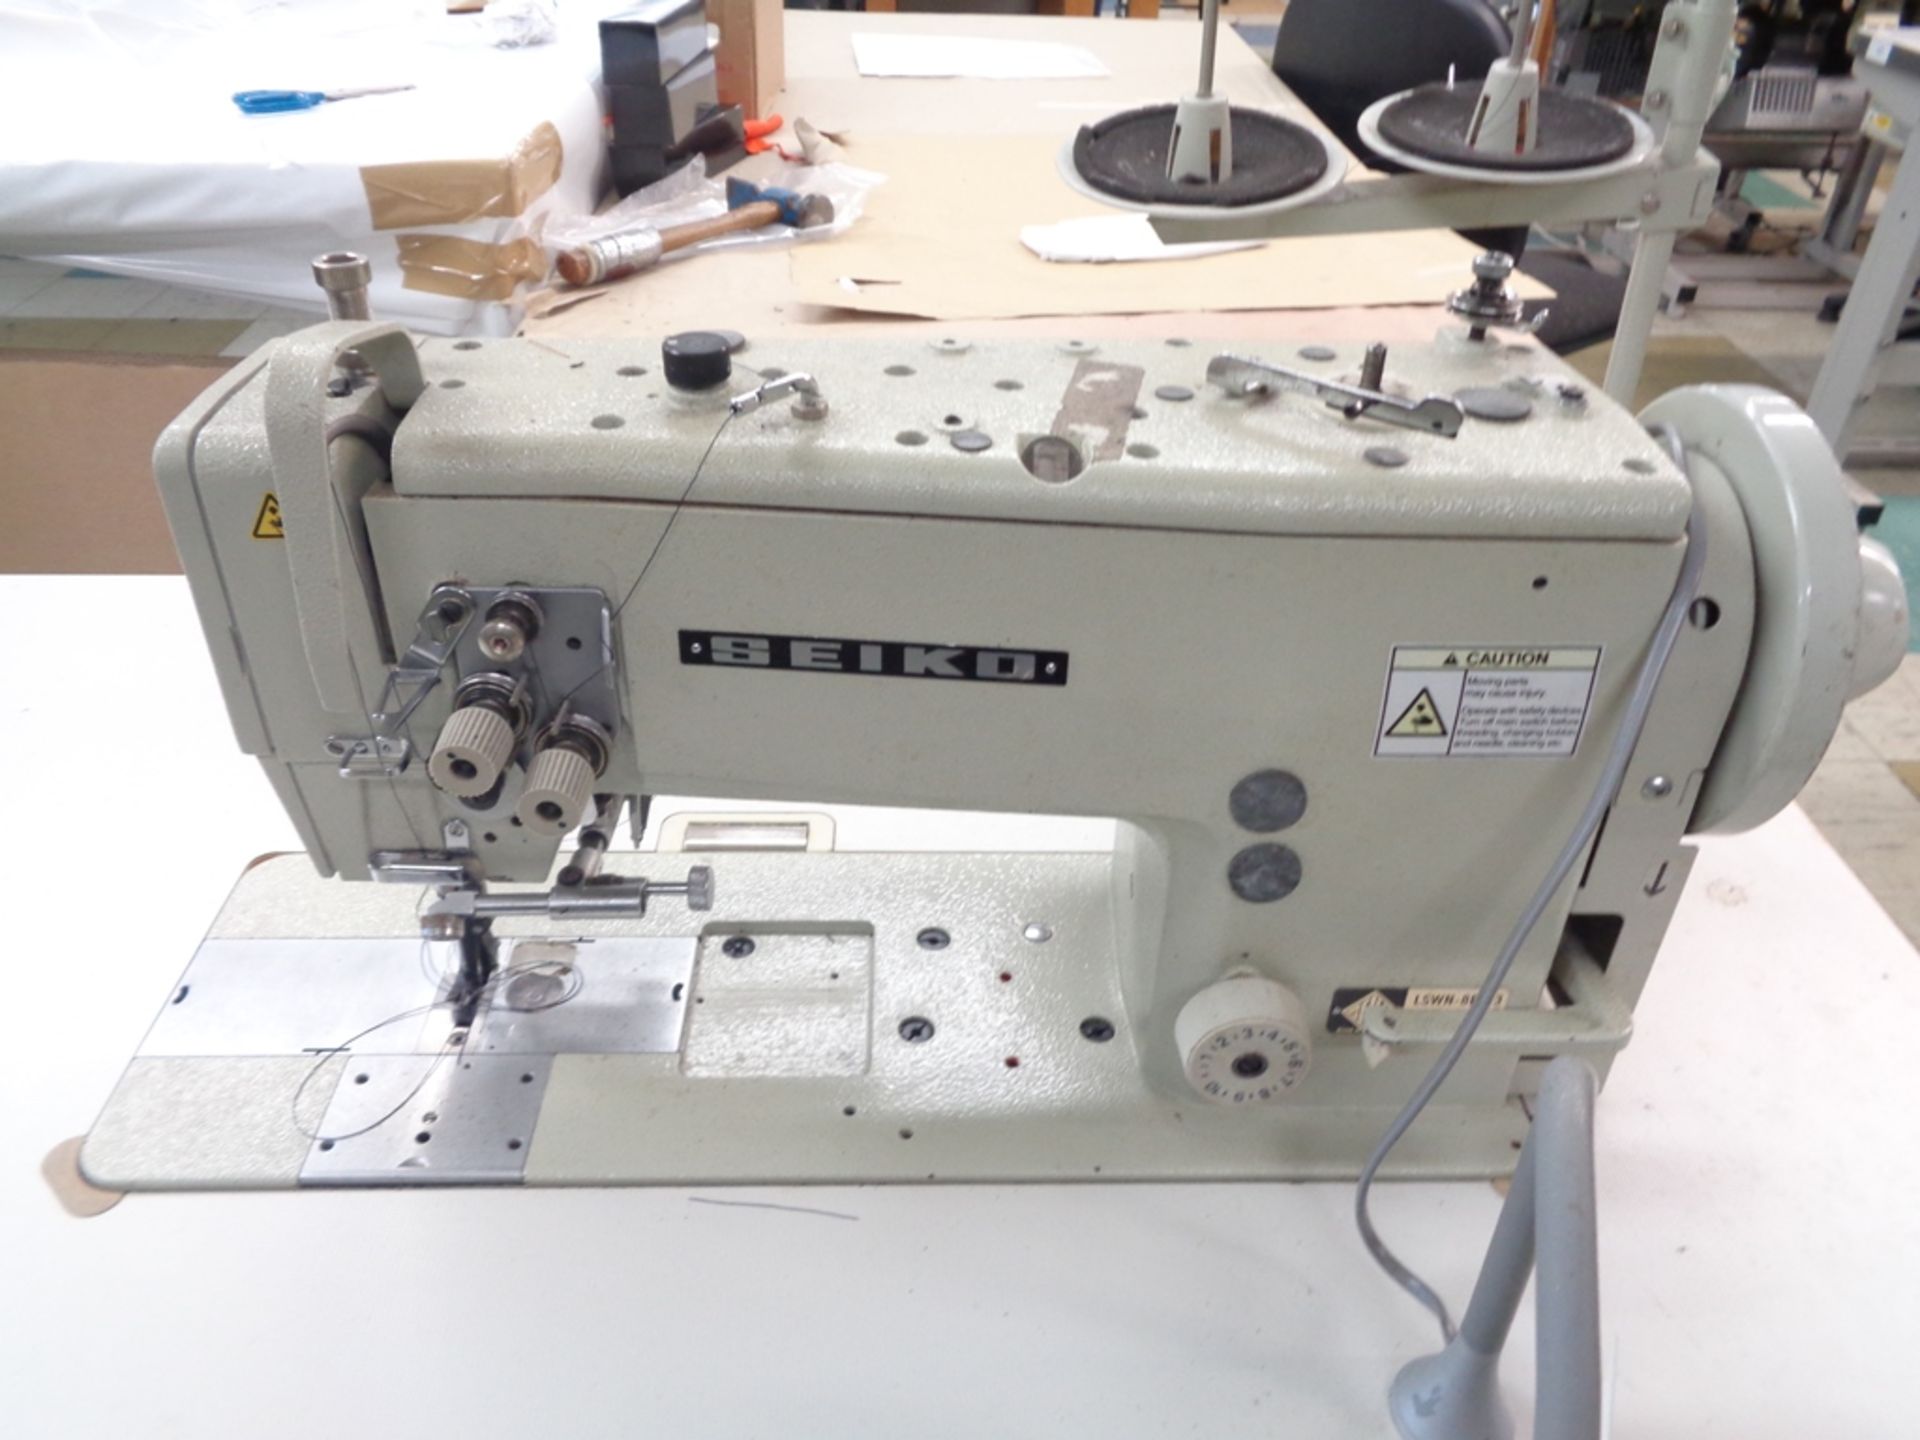 Seiko LSWN-8BL-3 high speed lockstitch sewing machine, with walking foot - Image 2 of 5